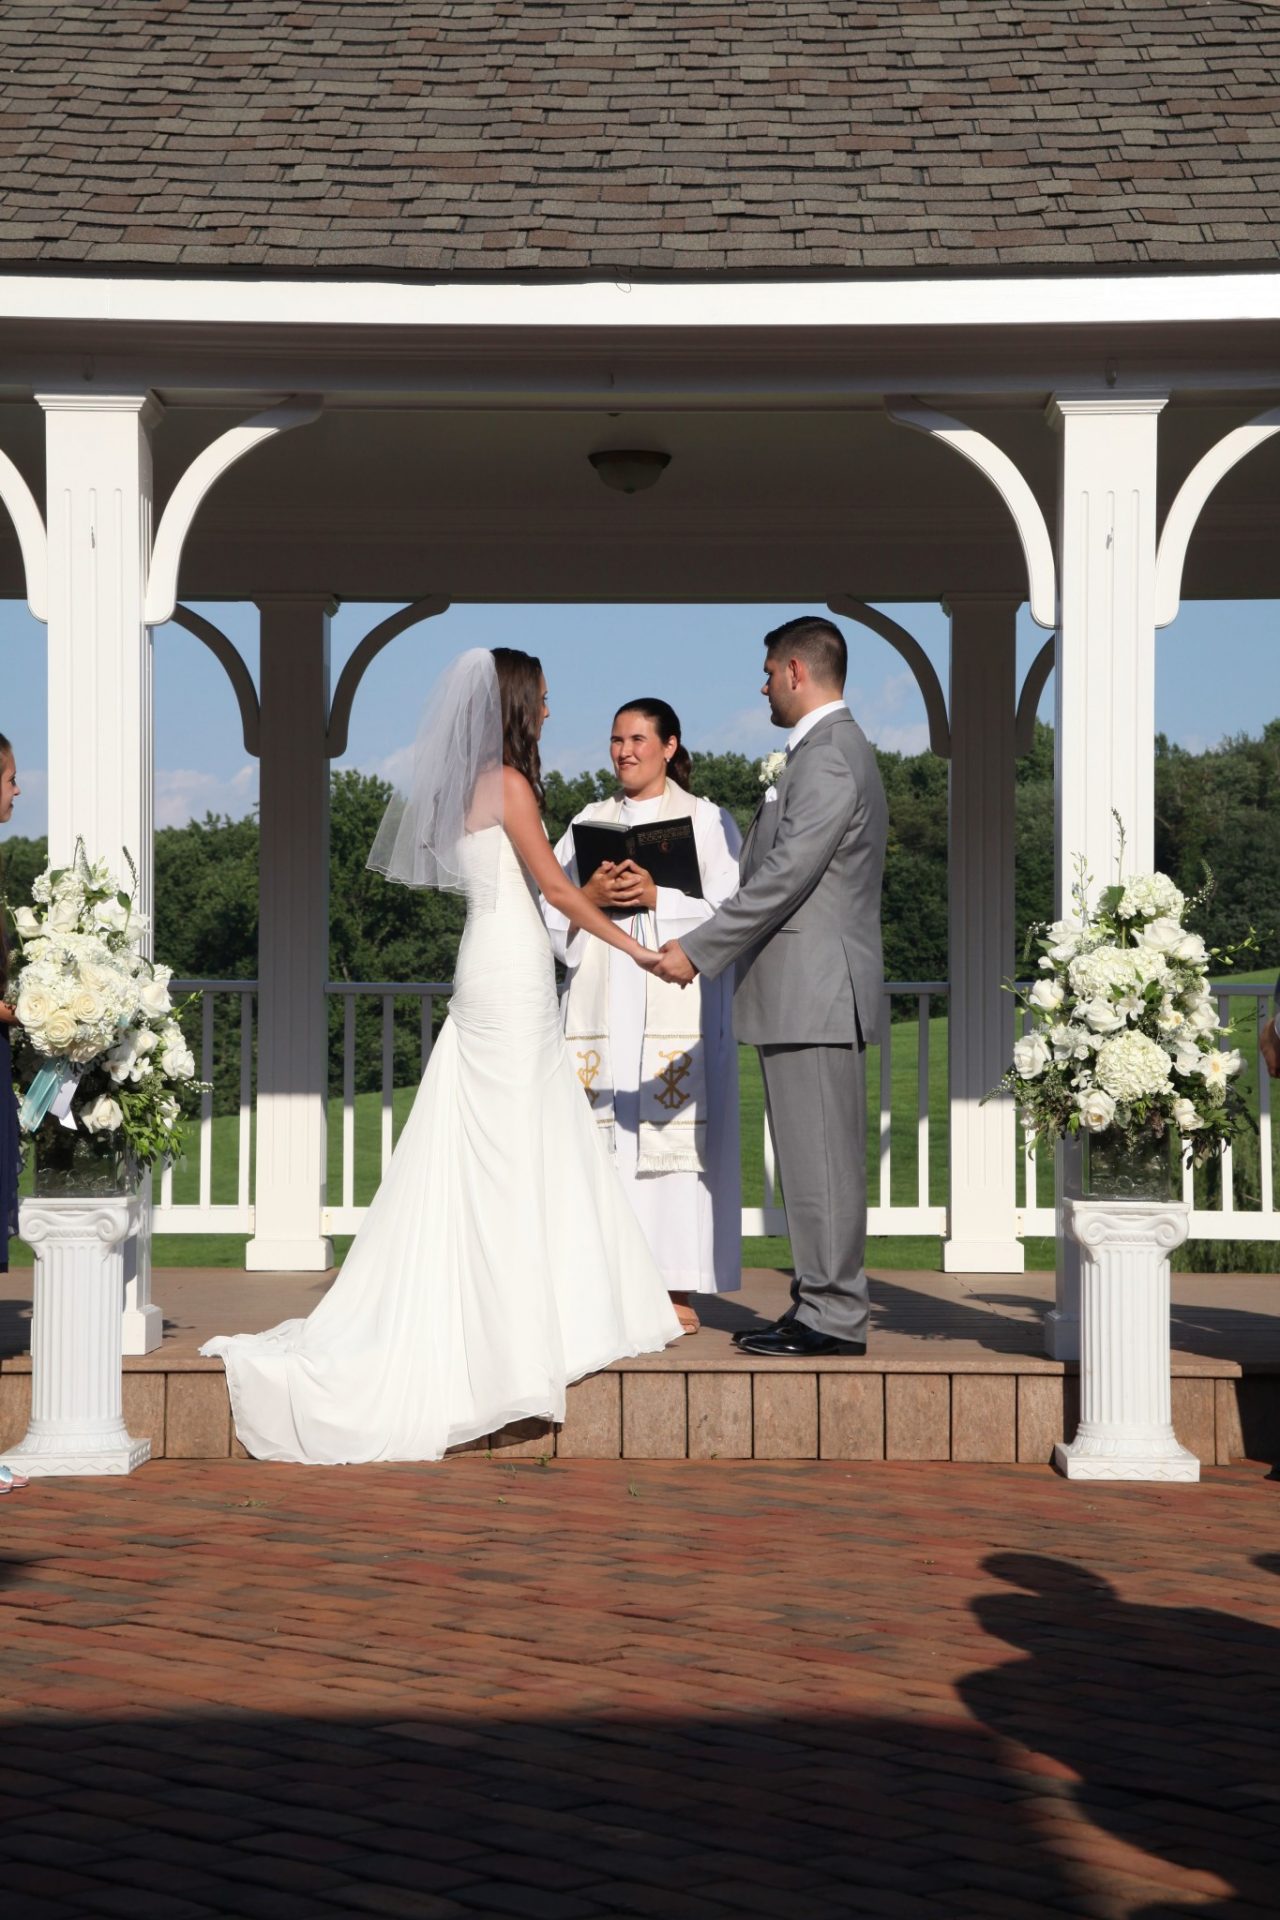 Close up of bride and groom on pavilion during outdoor wedding ceremony